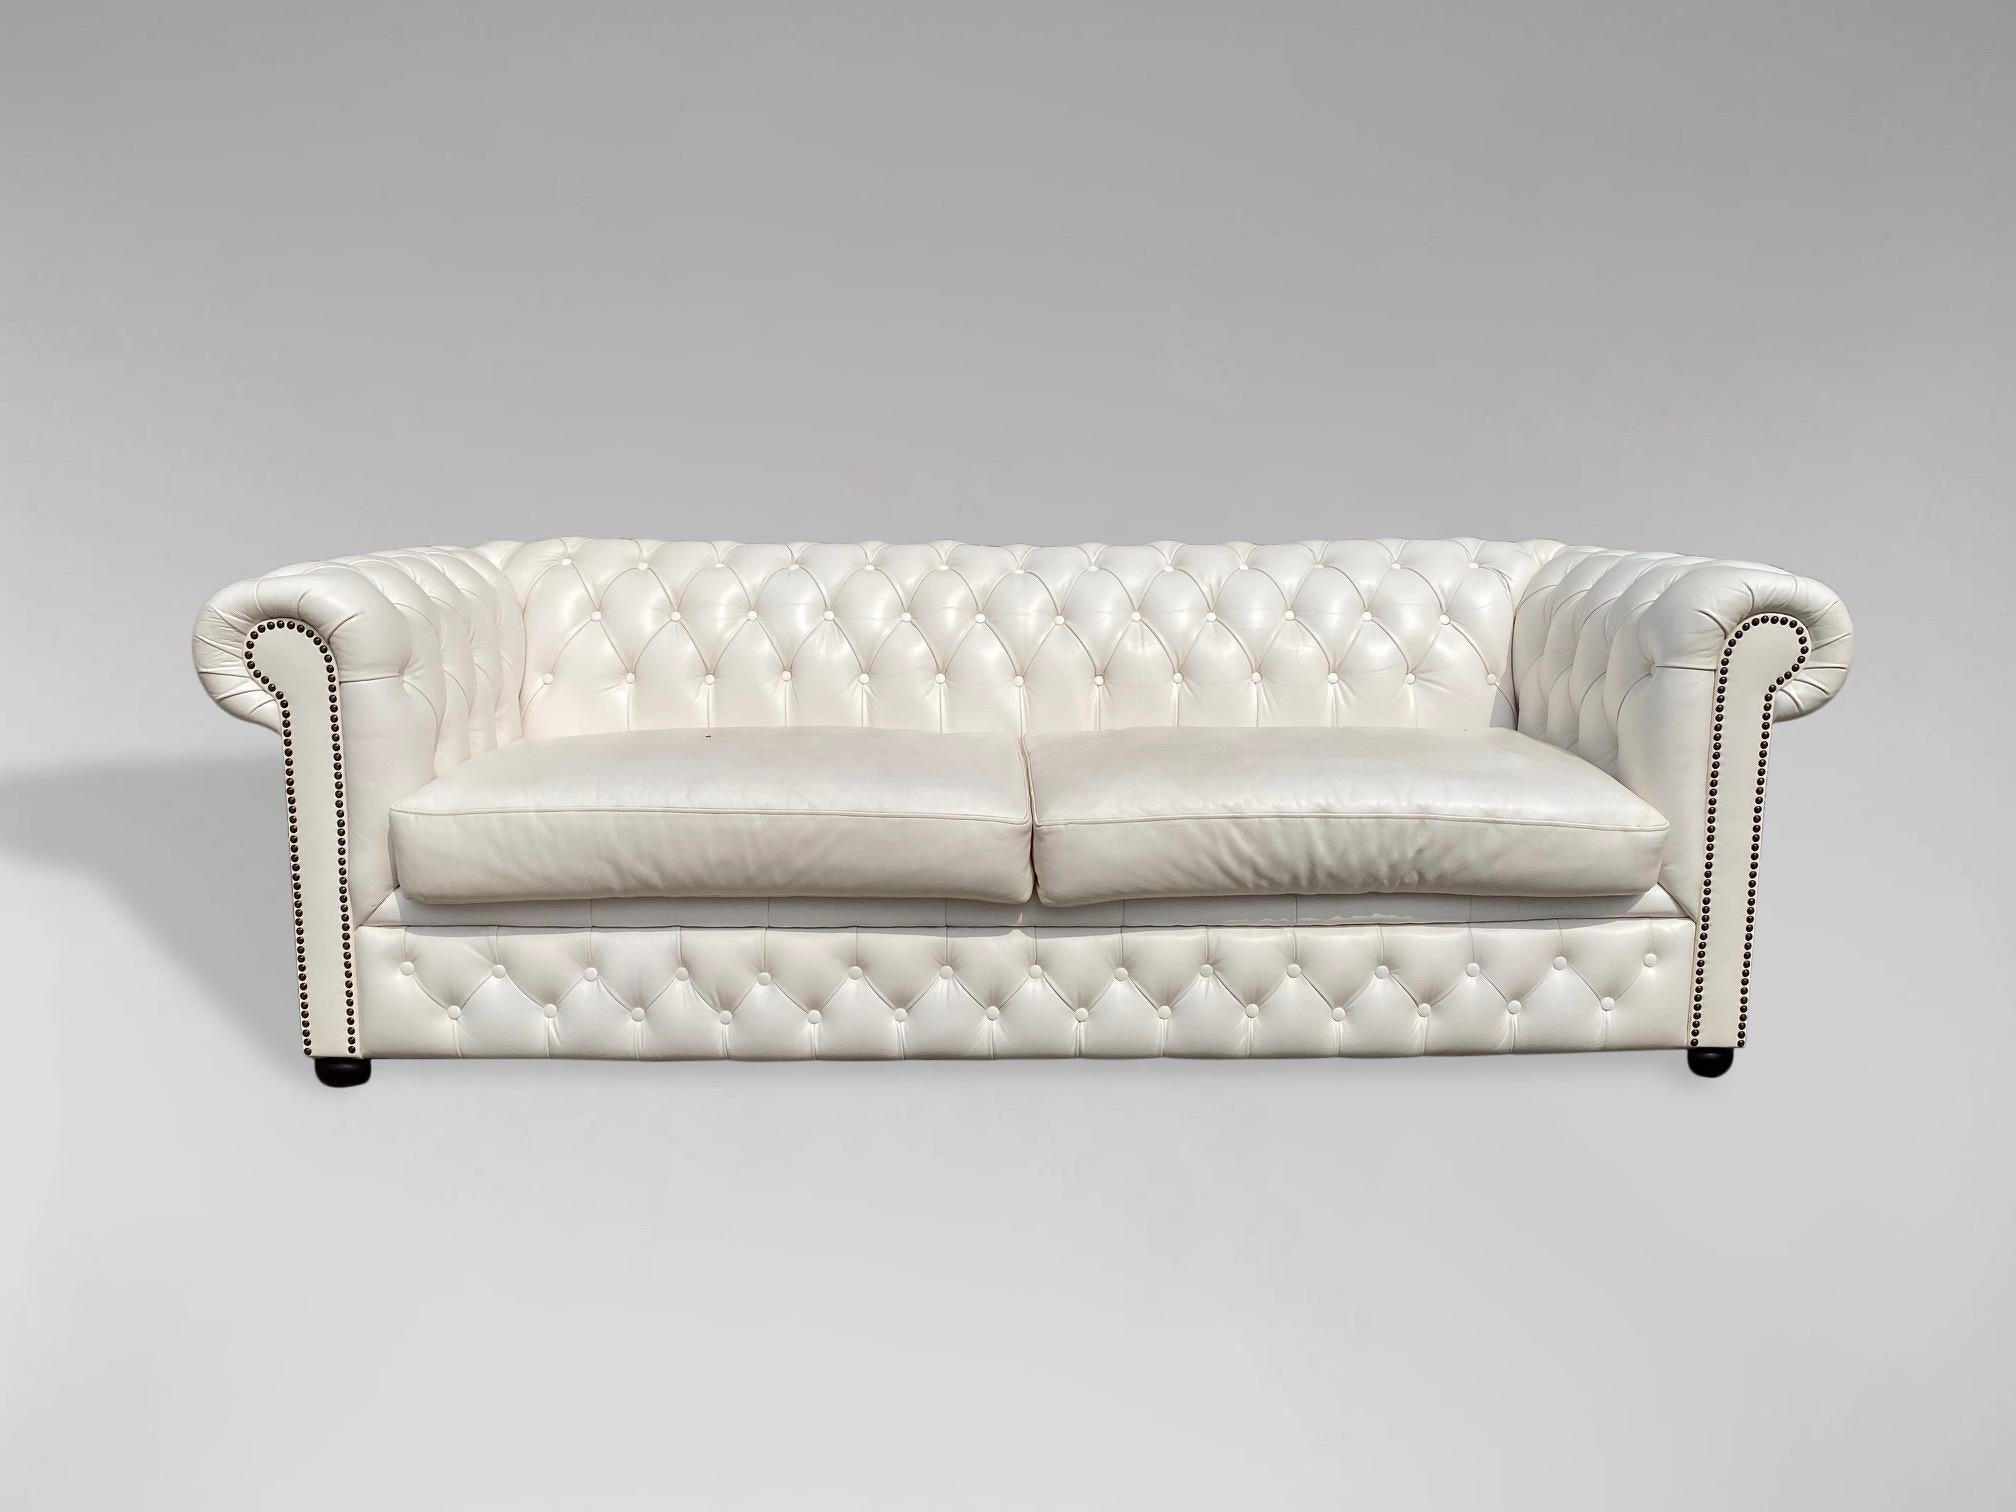 A 20th century large three seater white leather chesterfield with two large loose cushions, raised on 4 bun feet. A fine example of a good quality comfortable chesterfield. Very comfortable seating. A rather pleasing example.

The dimensions